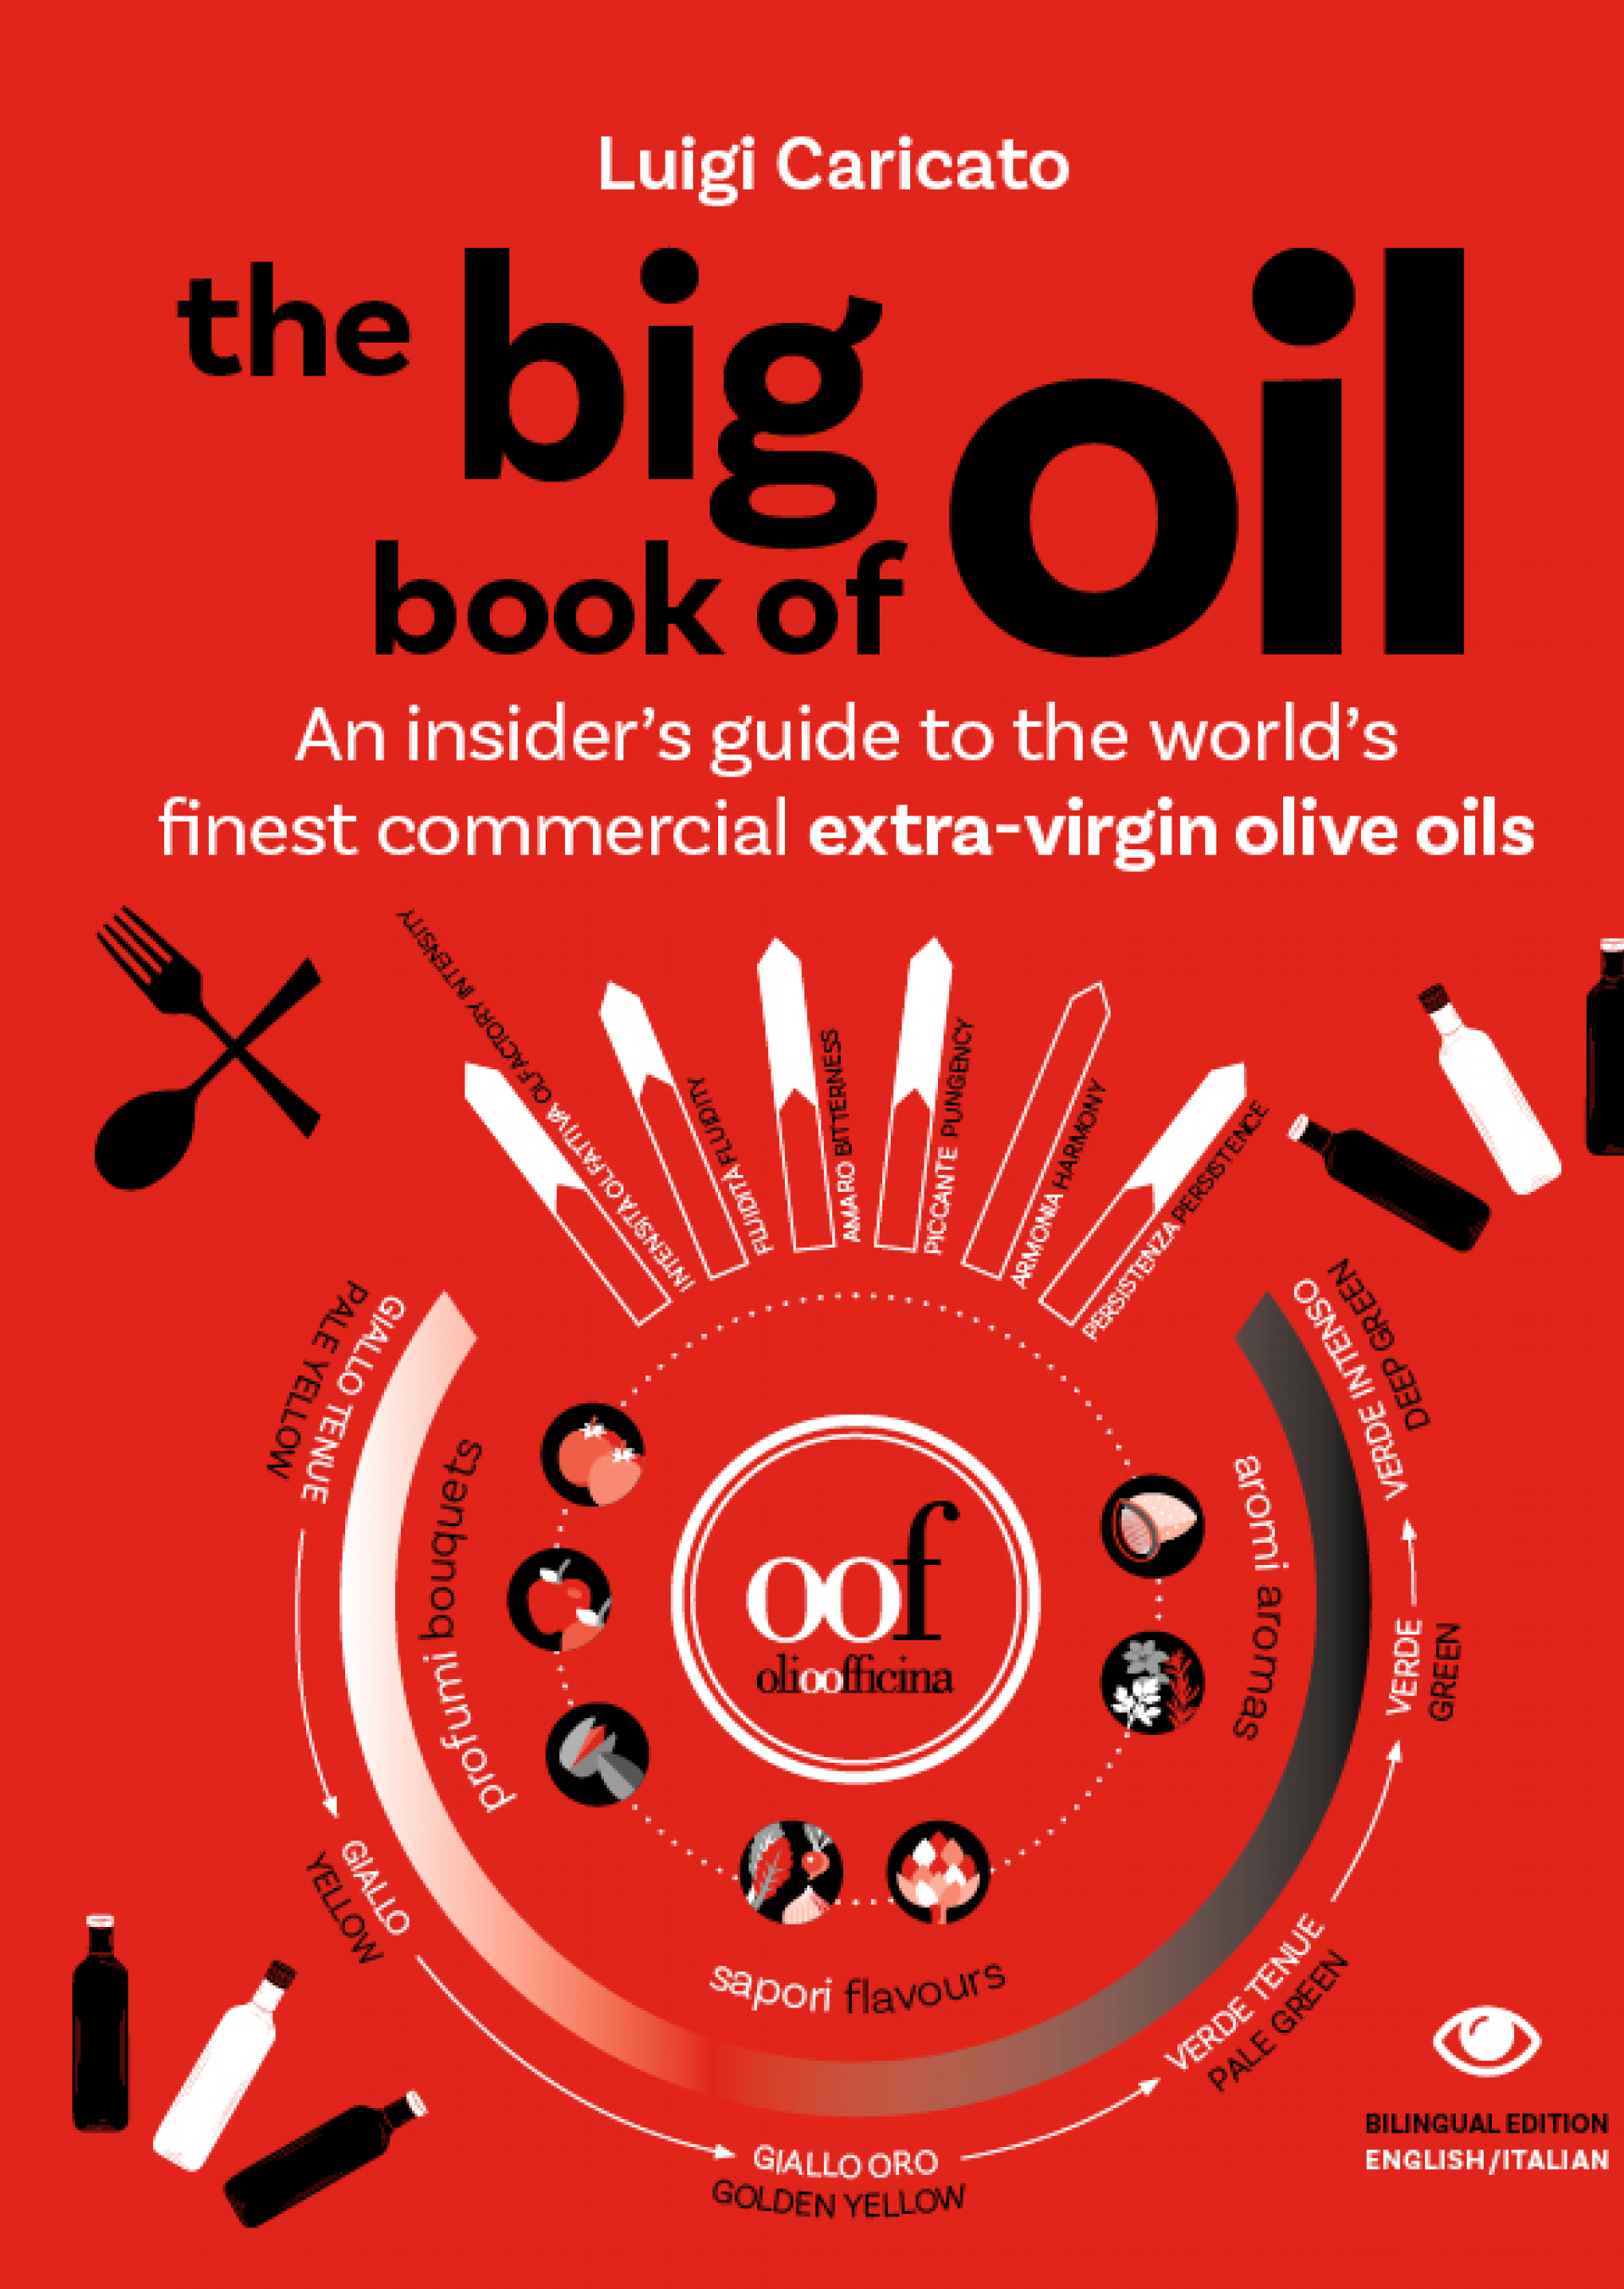 THE BIG BOOK OF OIL  An insider’s guide to the world’s finest commercial extra-virgin olive oils